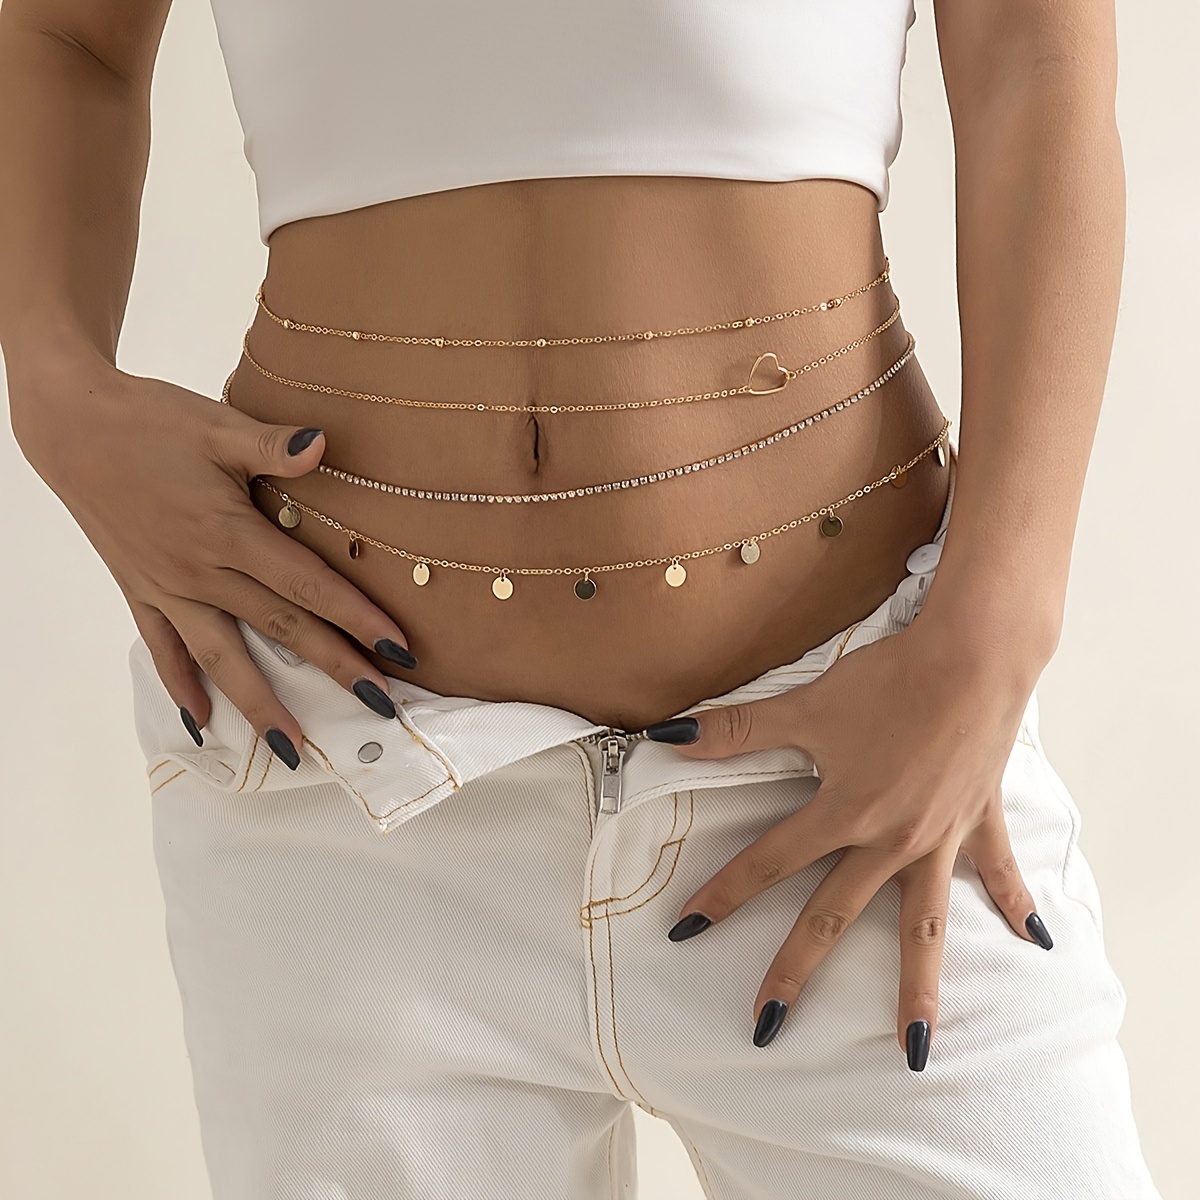 The Chain Belt Is Poised To Be the Accessory of Summer